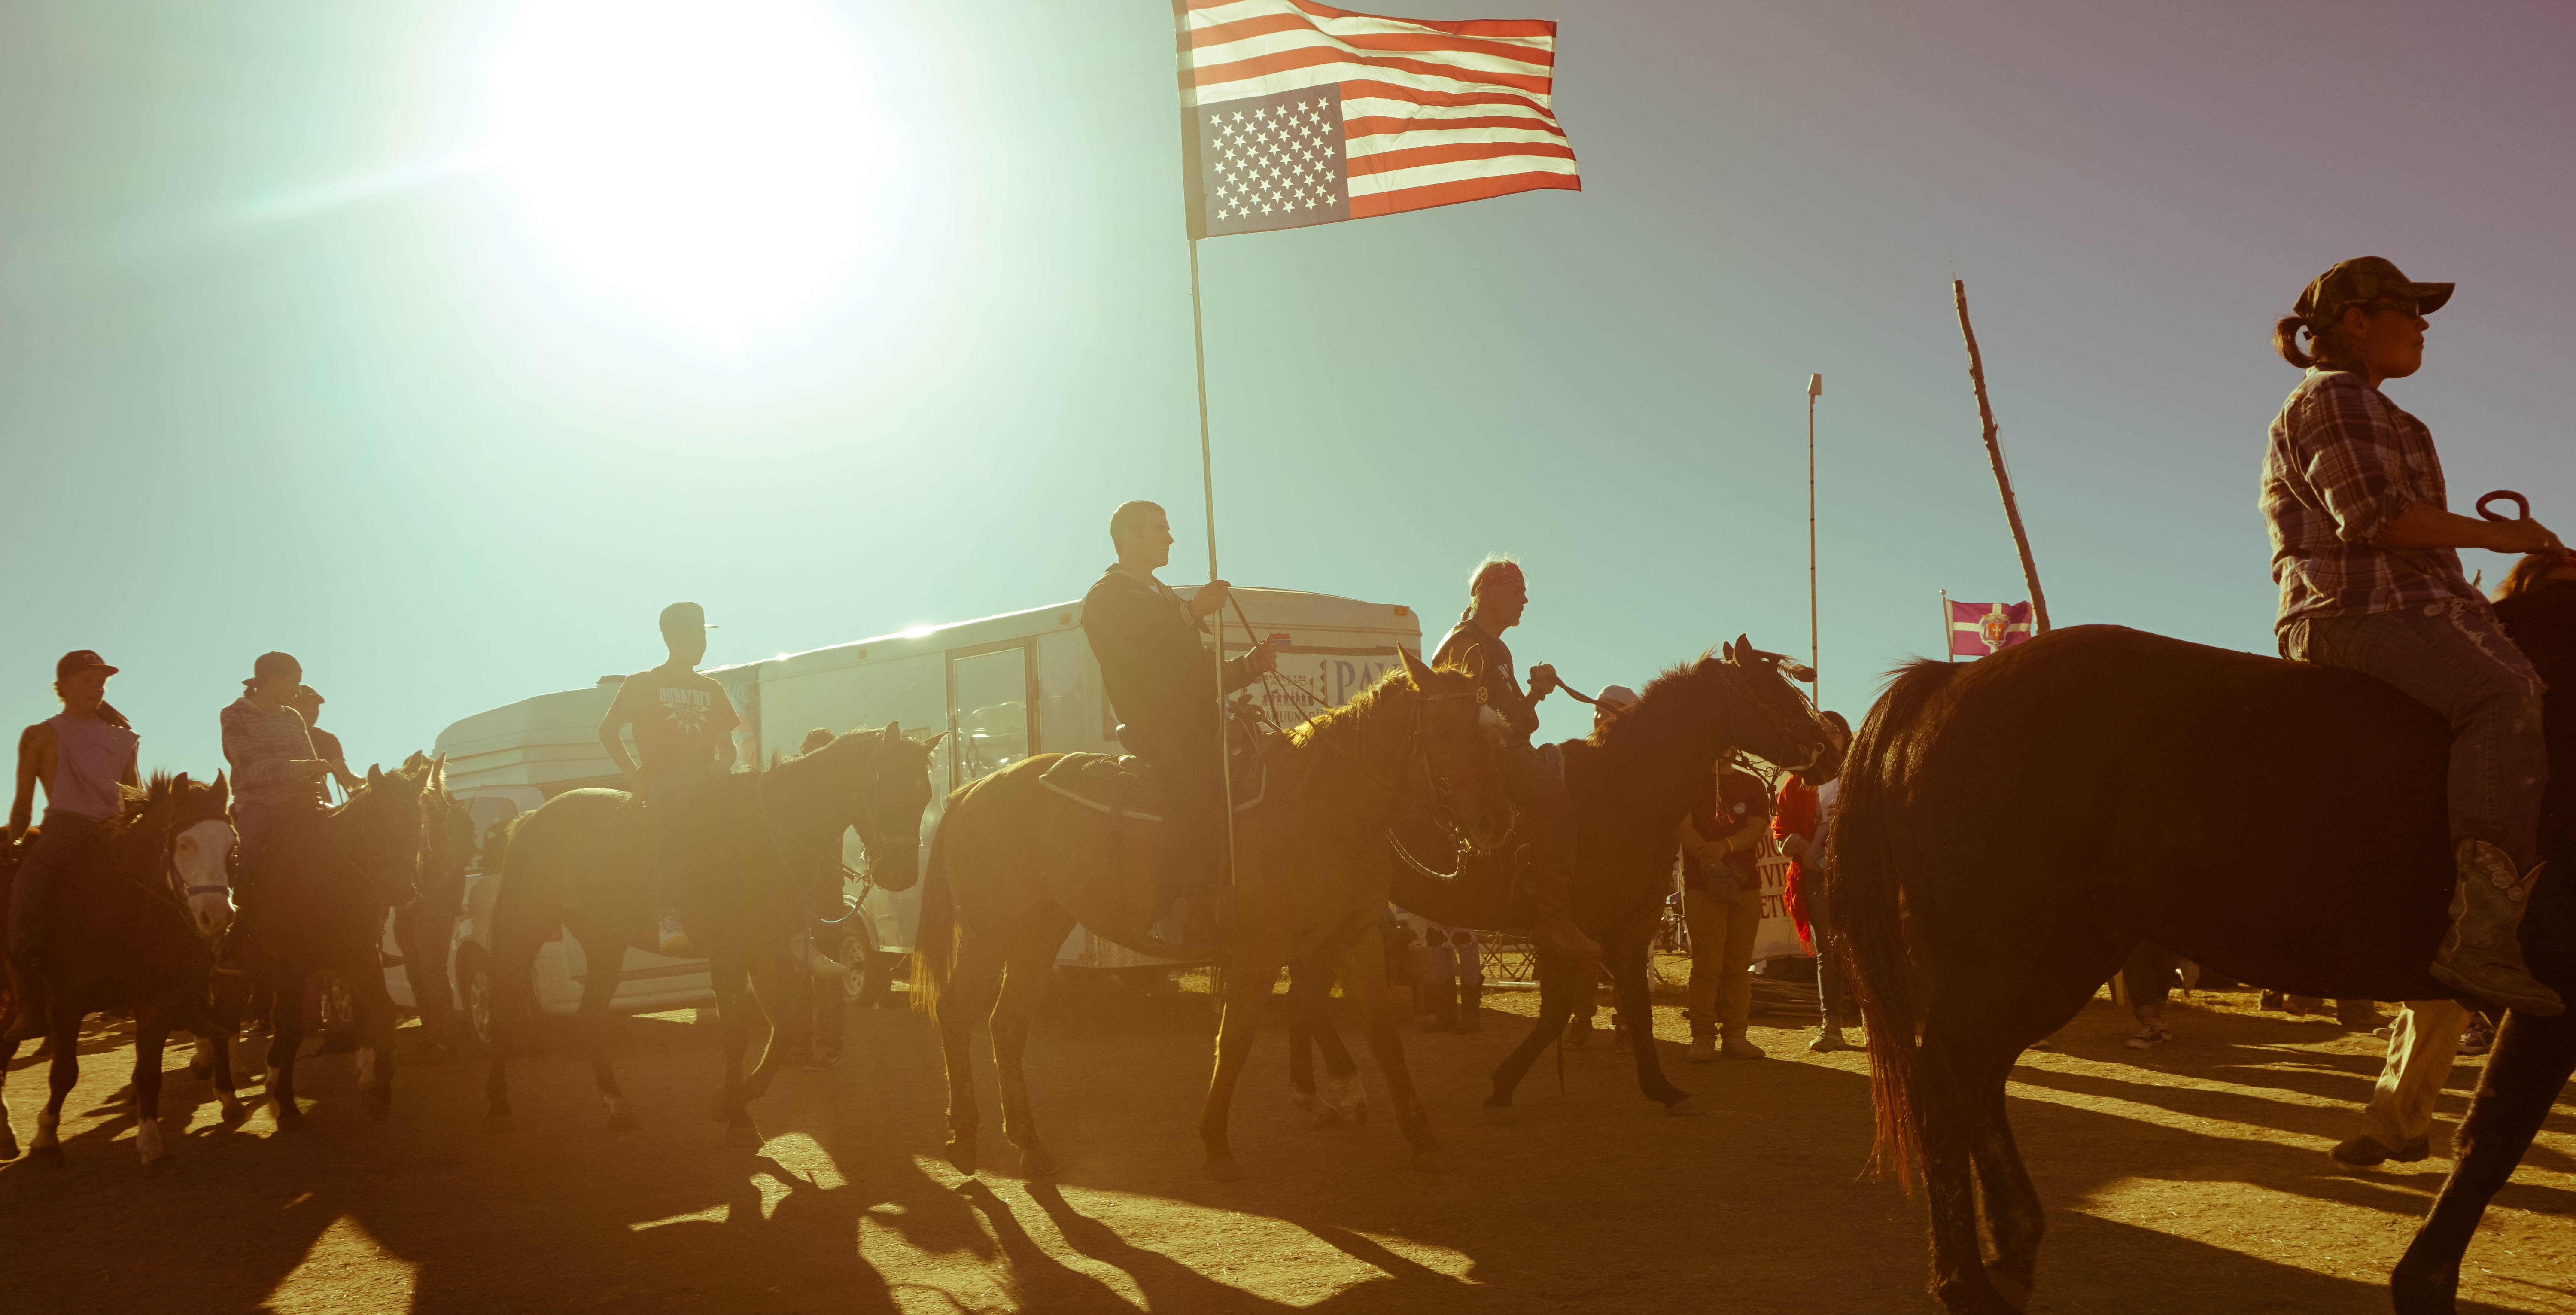 First Class Petty Officer Kash Jackson donned his dress blues on horseback in solidarity with #NoDAPL, the protest against the Dakota Access Pipleline